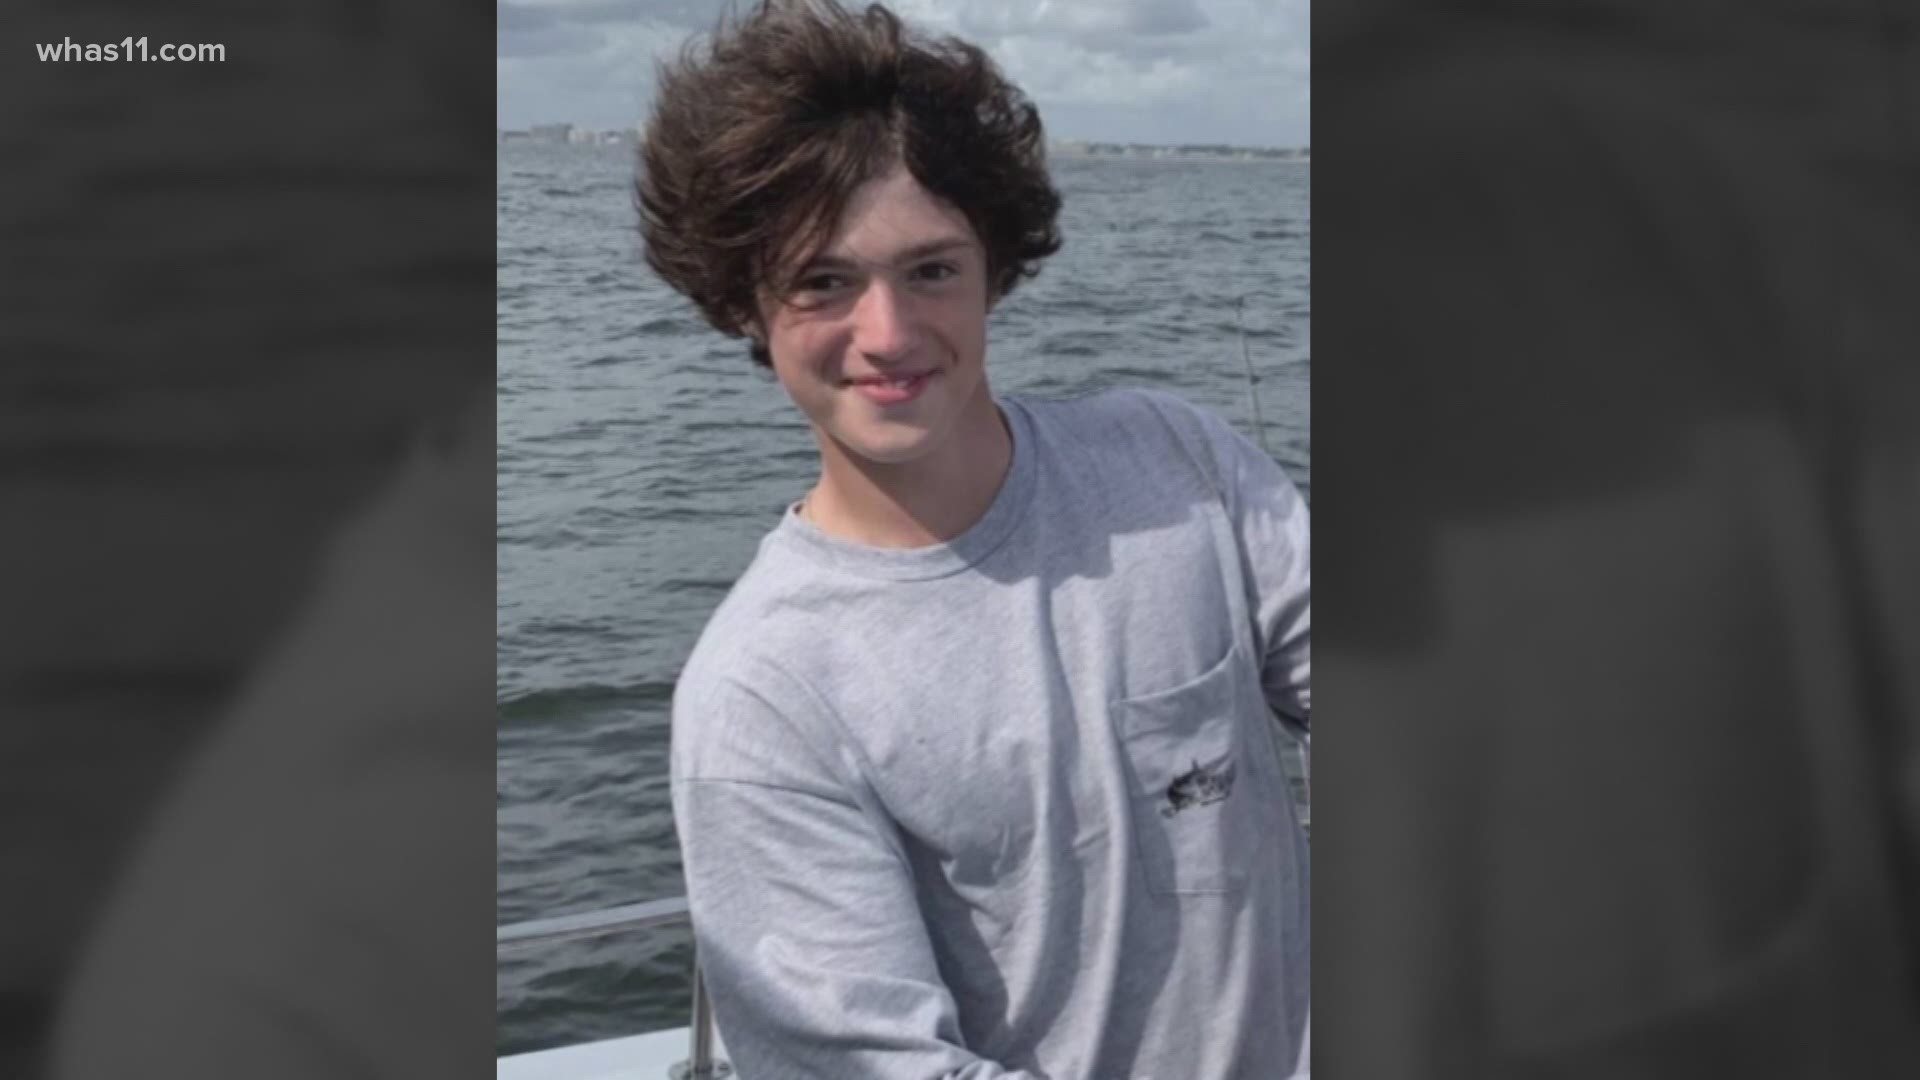 Jacob Stover, 16, disappeared Sunday while kayaking on the Ohio River. Today, experienced volunteers helped with looking at unexplored territory along the river.